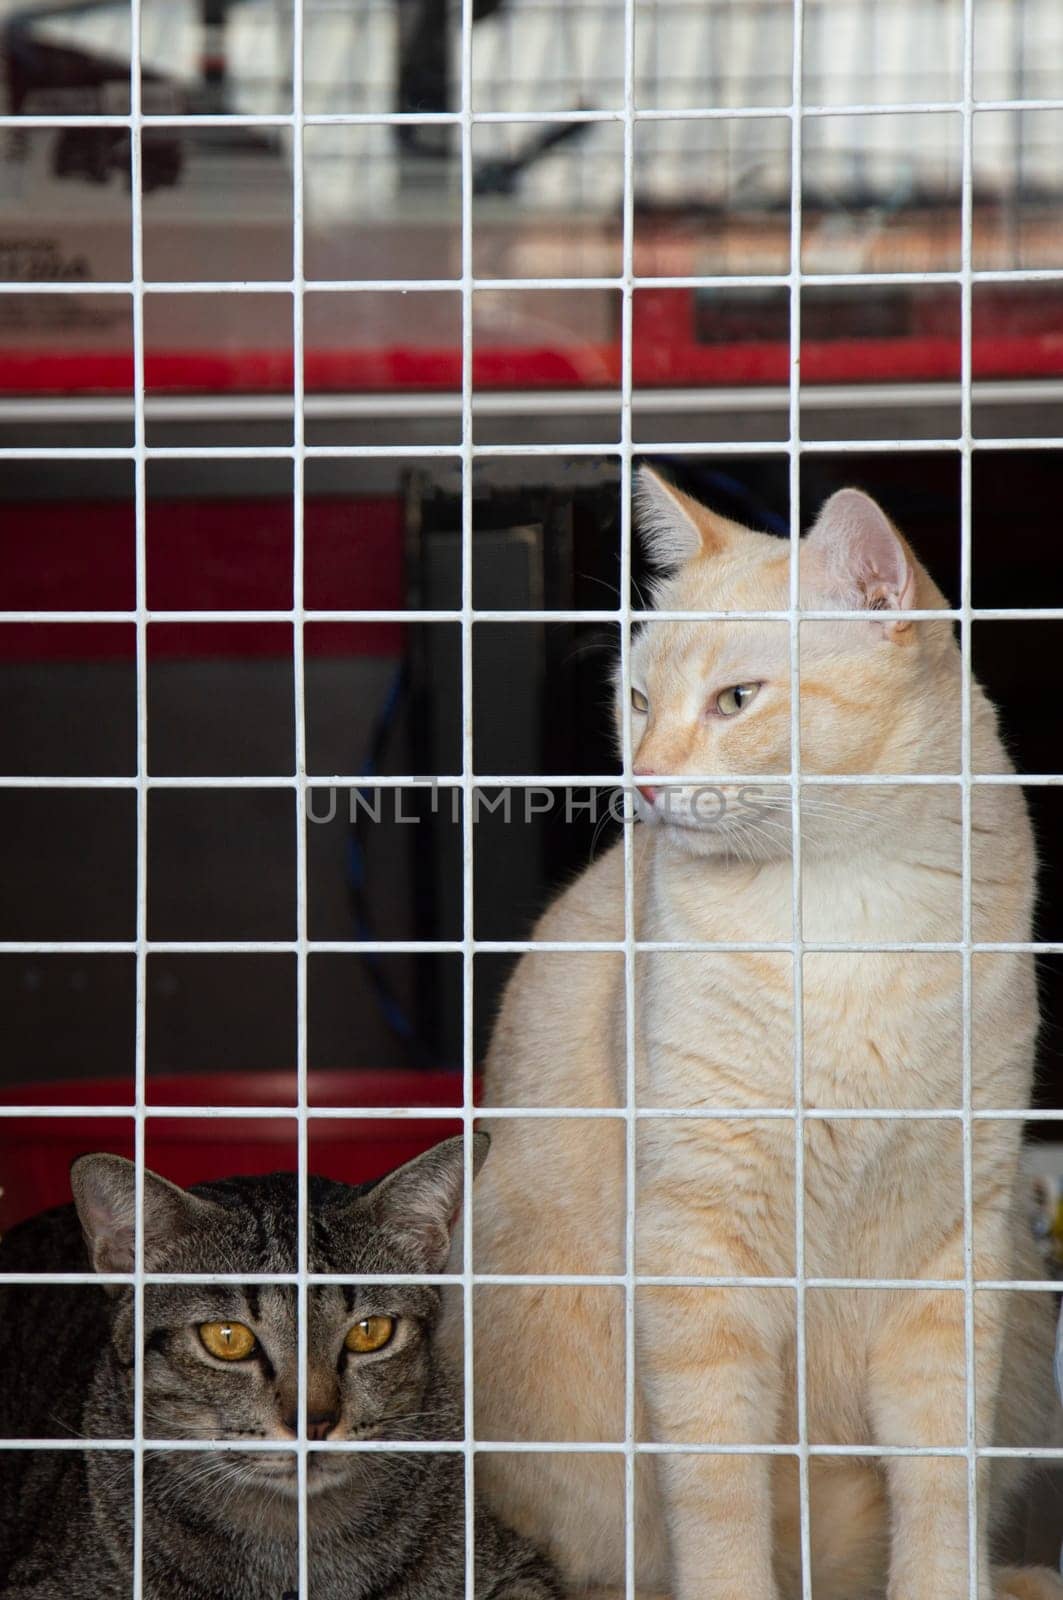 Two Thai cats sit and lie behind the barricades. This is done to prevent escapes which will keep them safe.